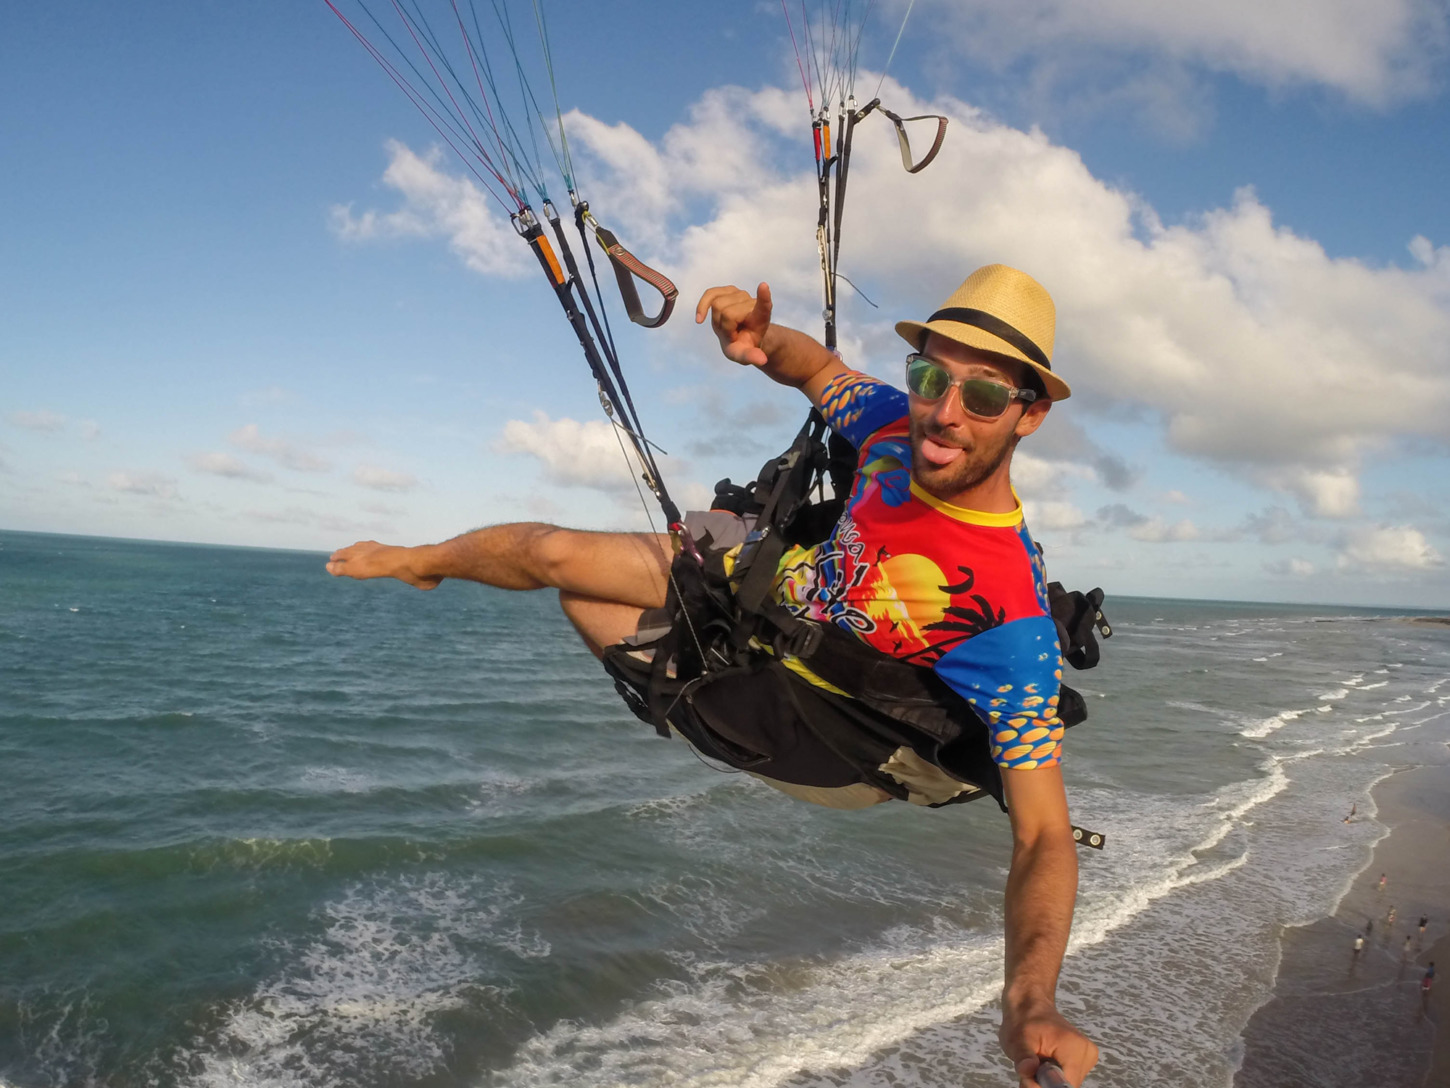 François Ragolski and his funky hat Fly above the atlantique ocean in Canoa Que Brada Brazil Glide Paragliding School